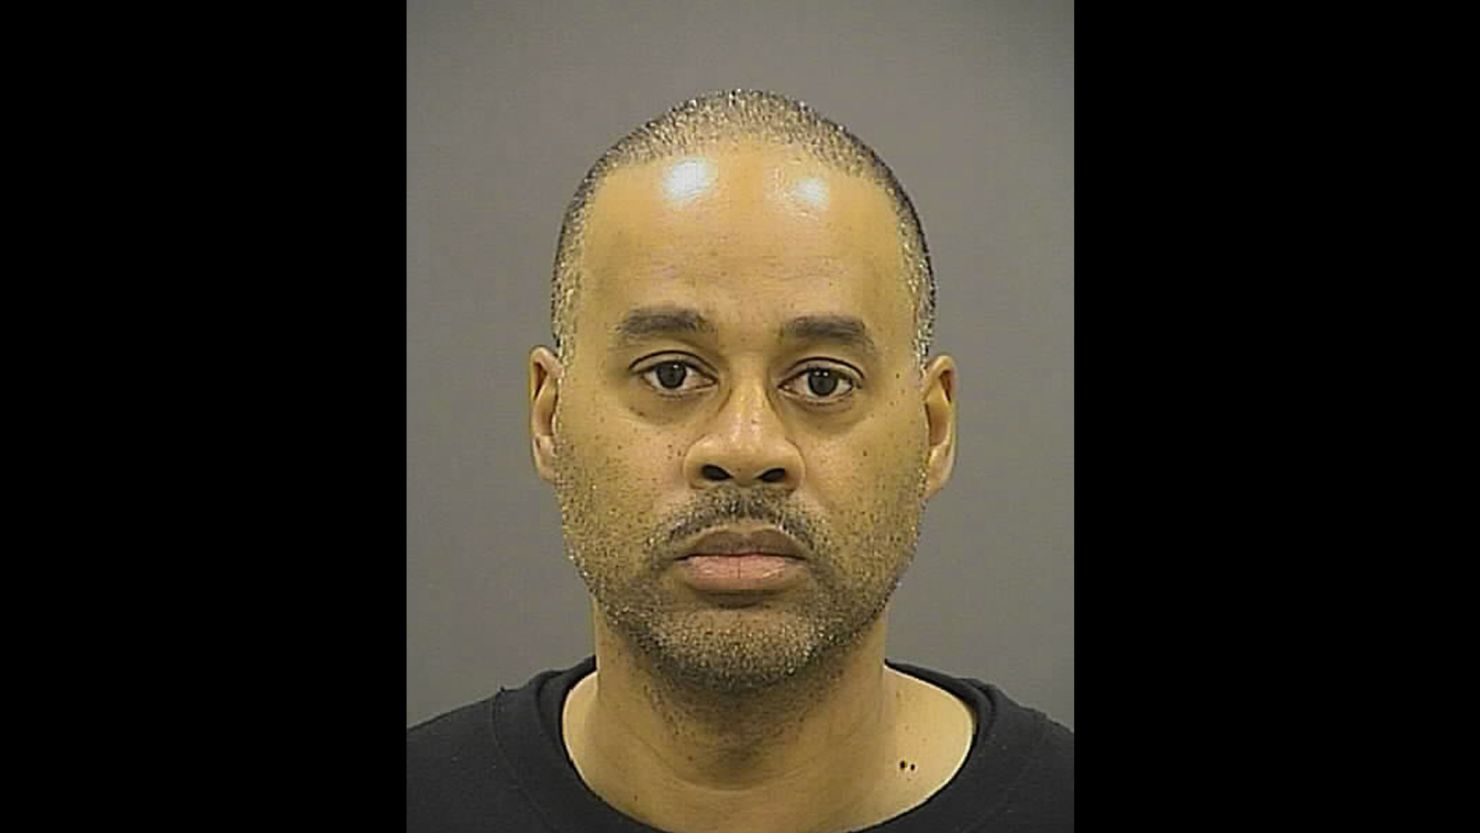 Officer Caesar Goodson drove the police transport van carrying Freddie Gray.